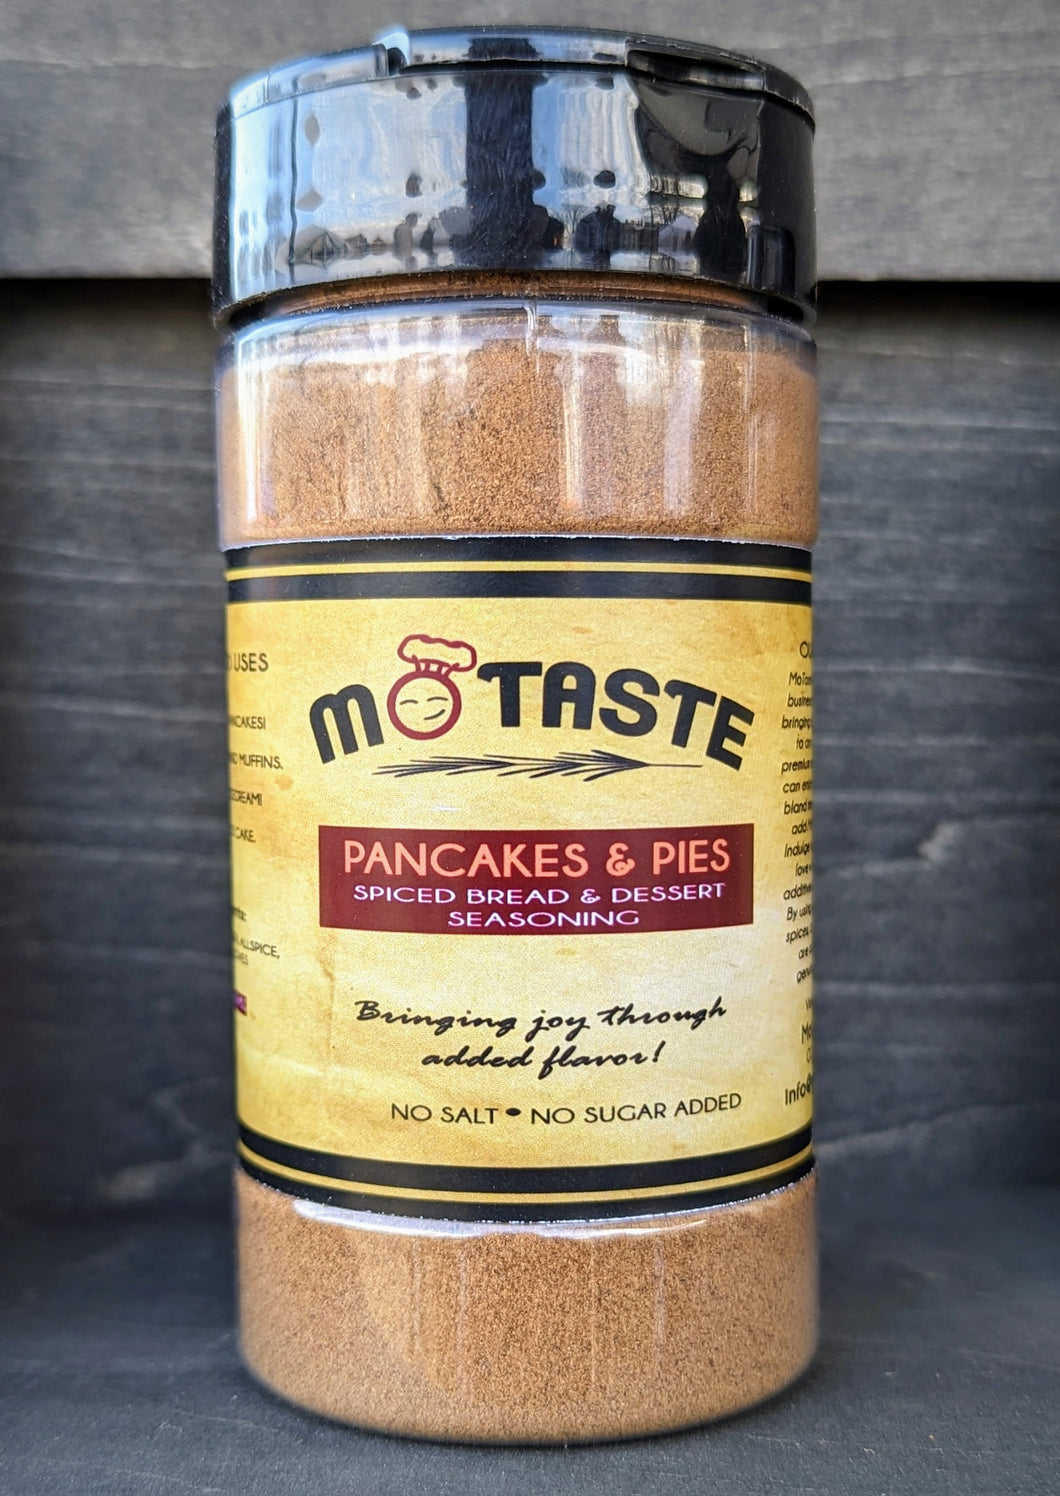 Pancakes & Pies Spiced Bread and Dessert Seasoning